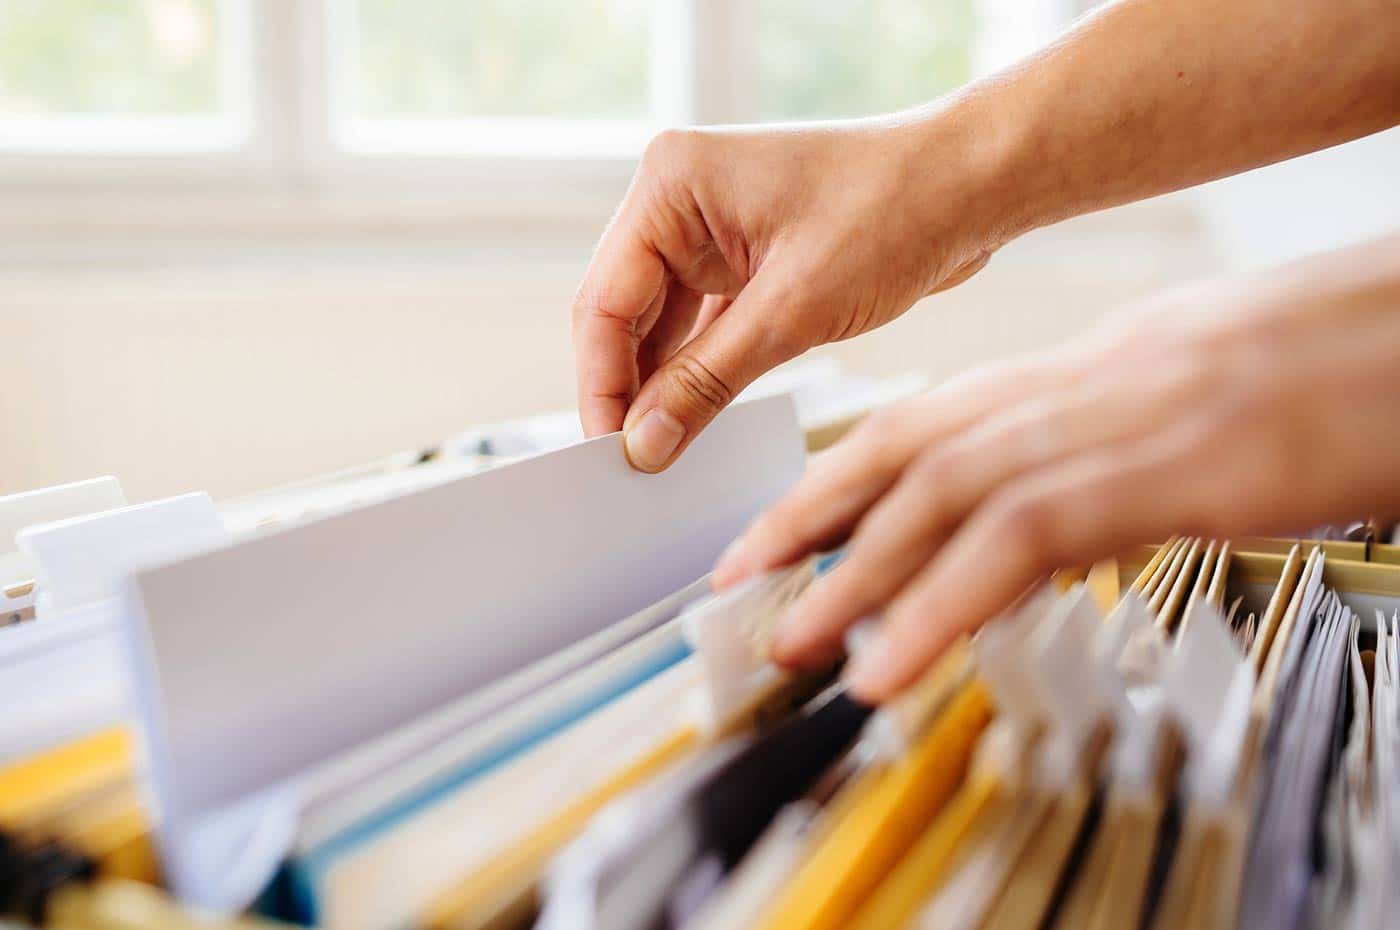 A person sorts through file folders and retrieves a needed document.